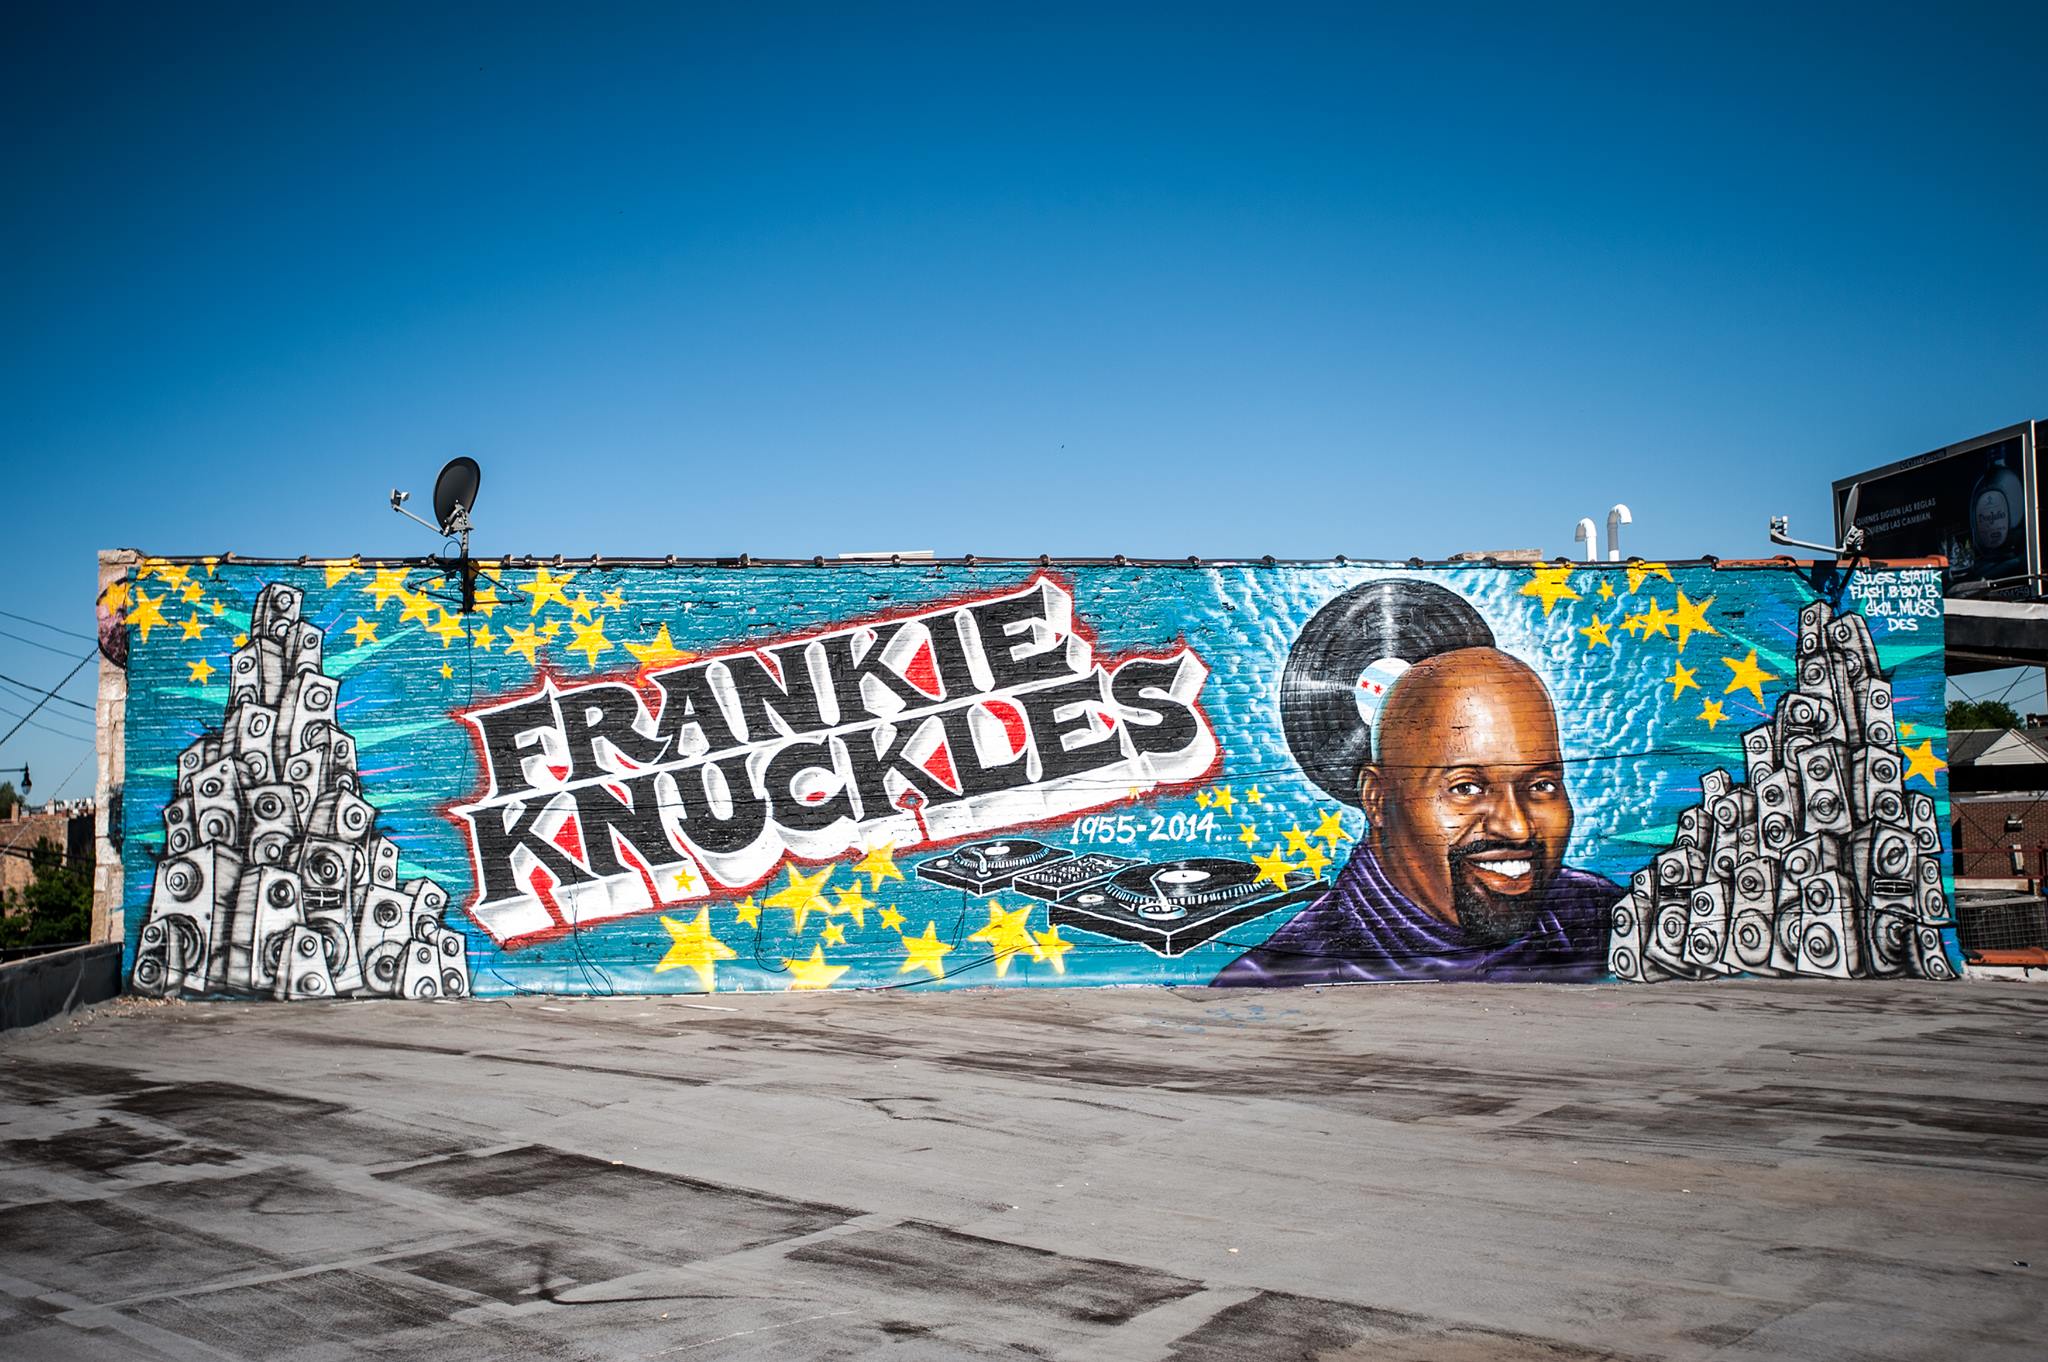 In 2014, after iconic Chicago artist Frankie Knuckles passed away, a crew o...